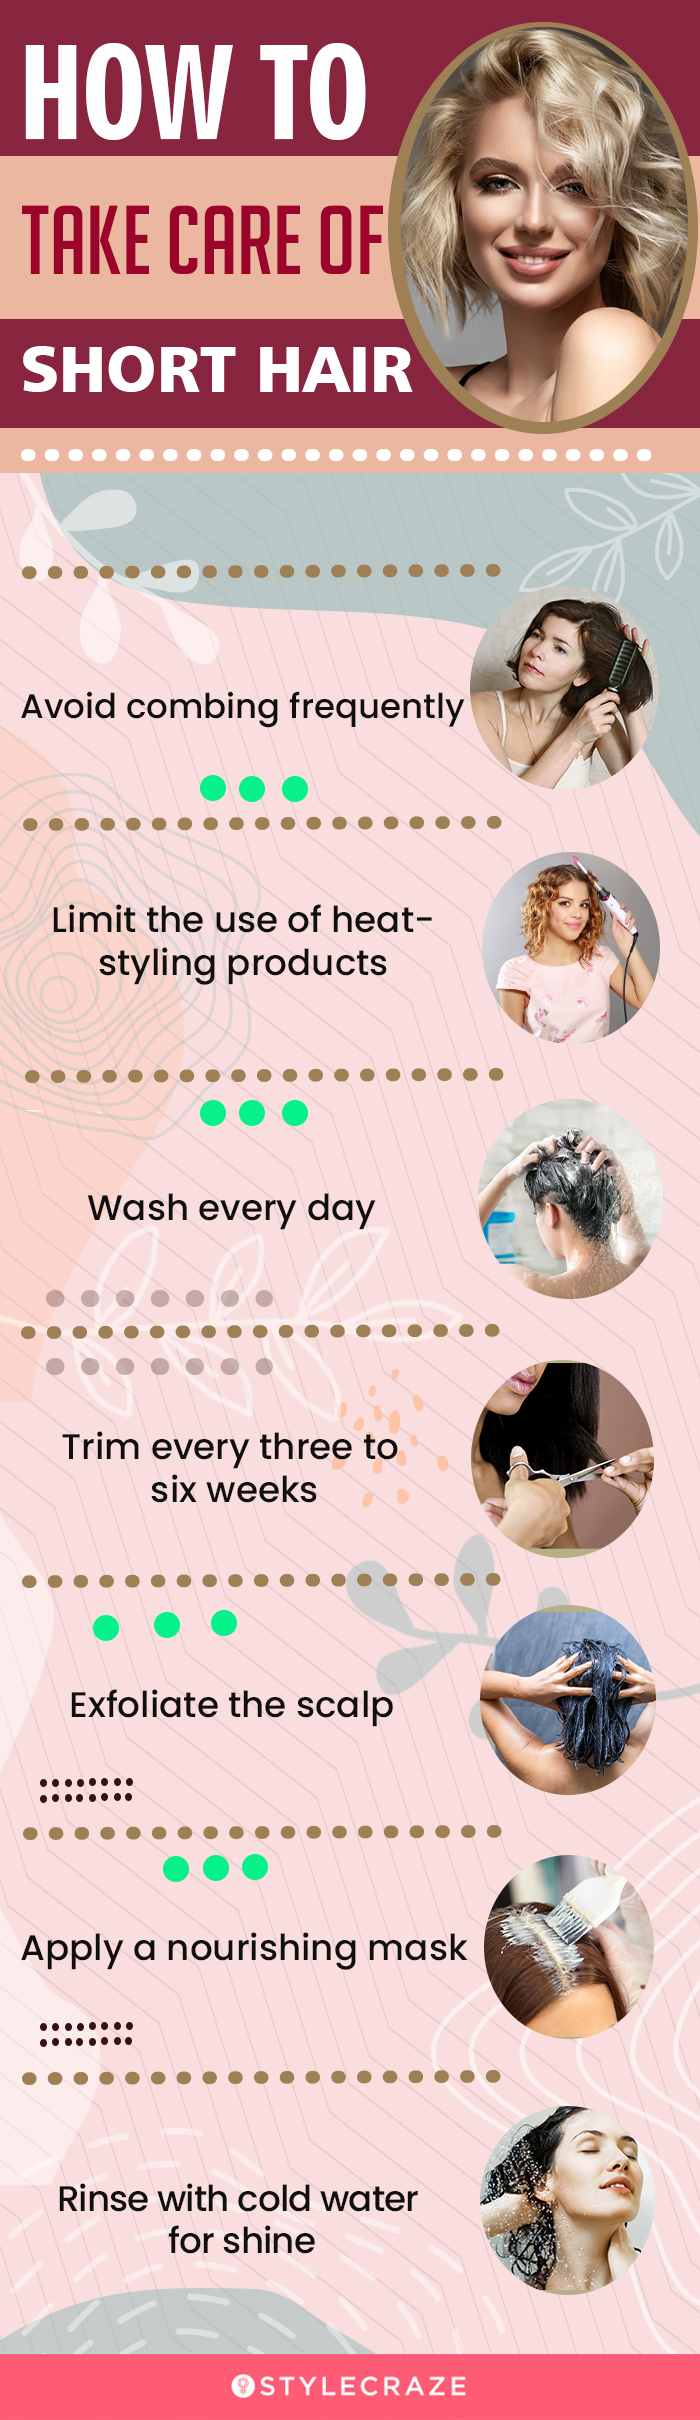 how to take care of short hair (infographic)